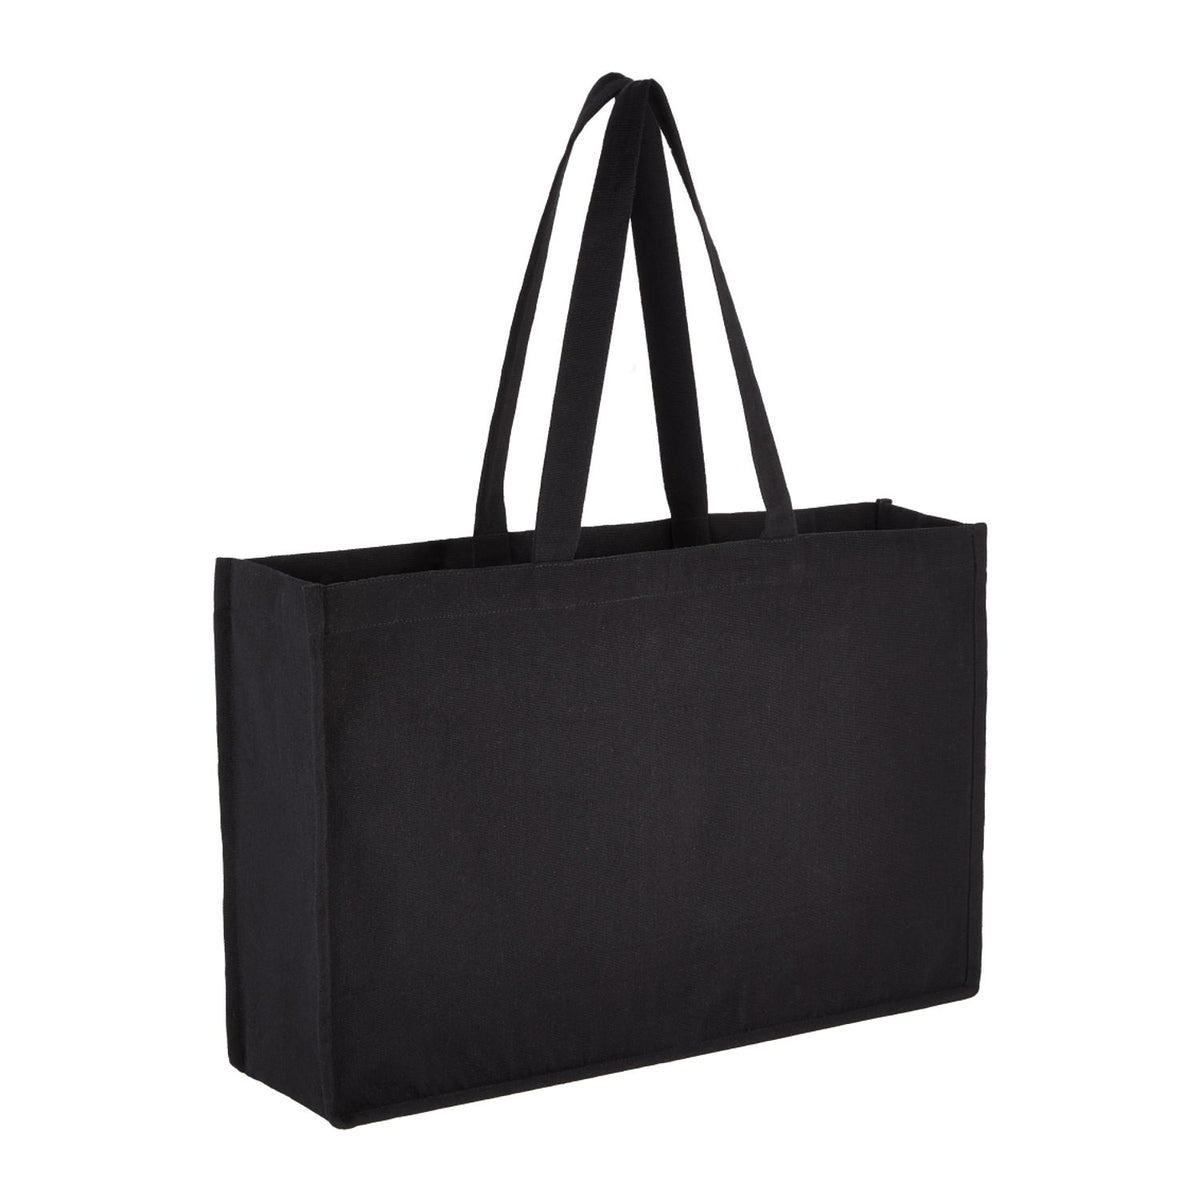 Repose 10 oz. Recycled Cotton Shoulder Tote